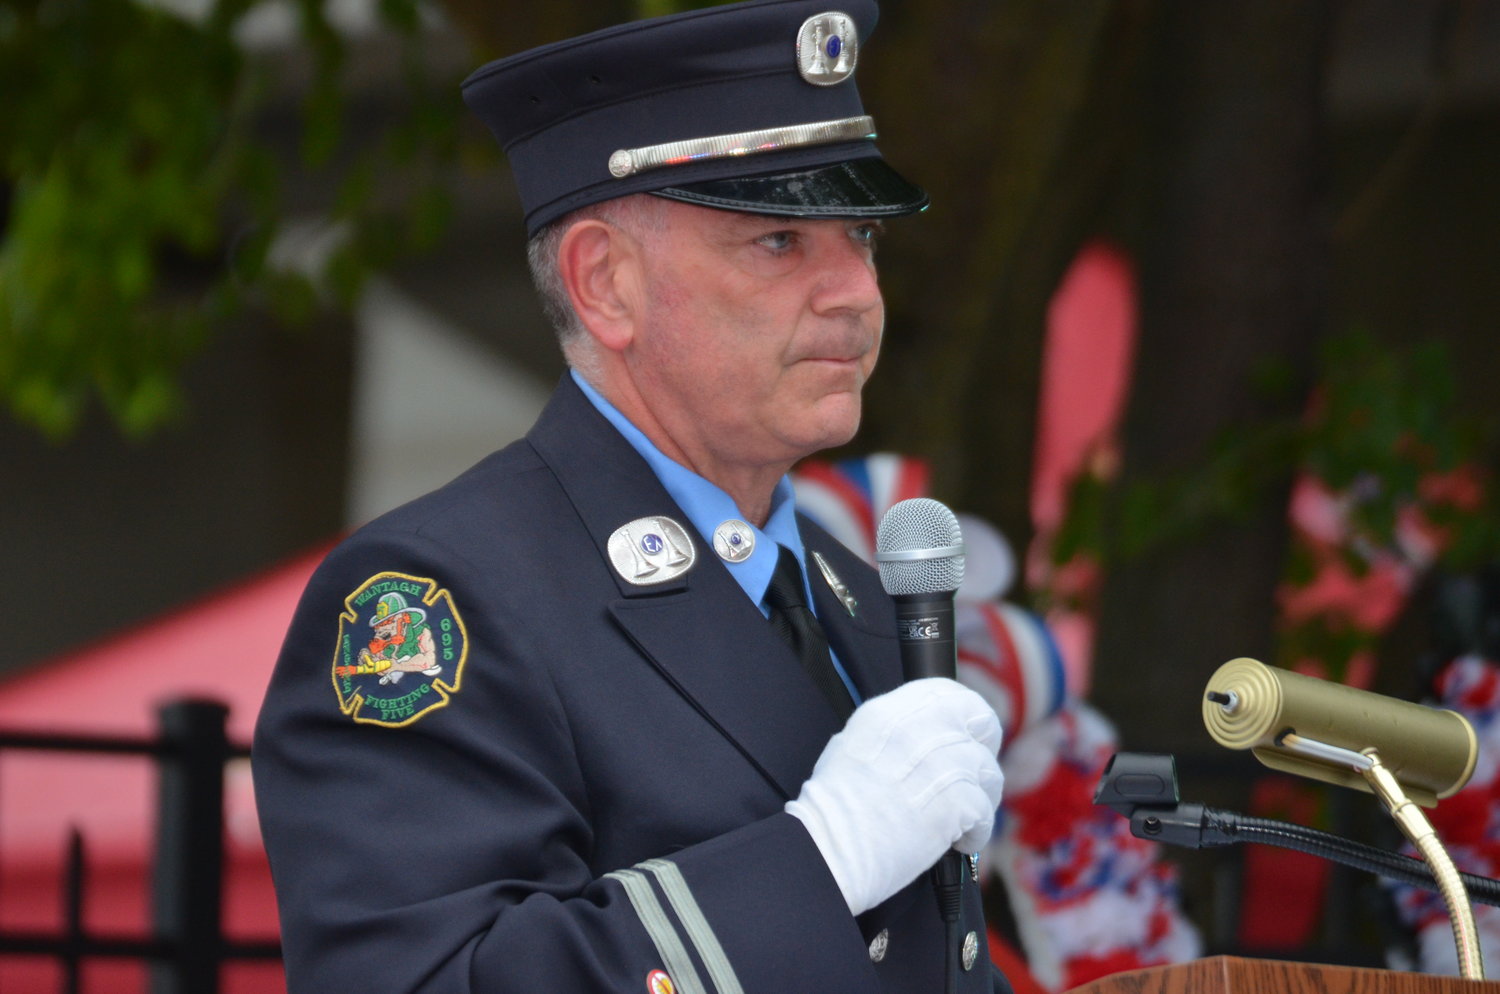 Nassau County Legislator Steve Rhoads, a volunteer firefighter himself in Wantagh, took part in the Merrick ceremony, at the intersection of Sunrise Highway and Merrick Avenue.